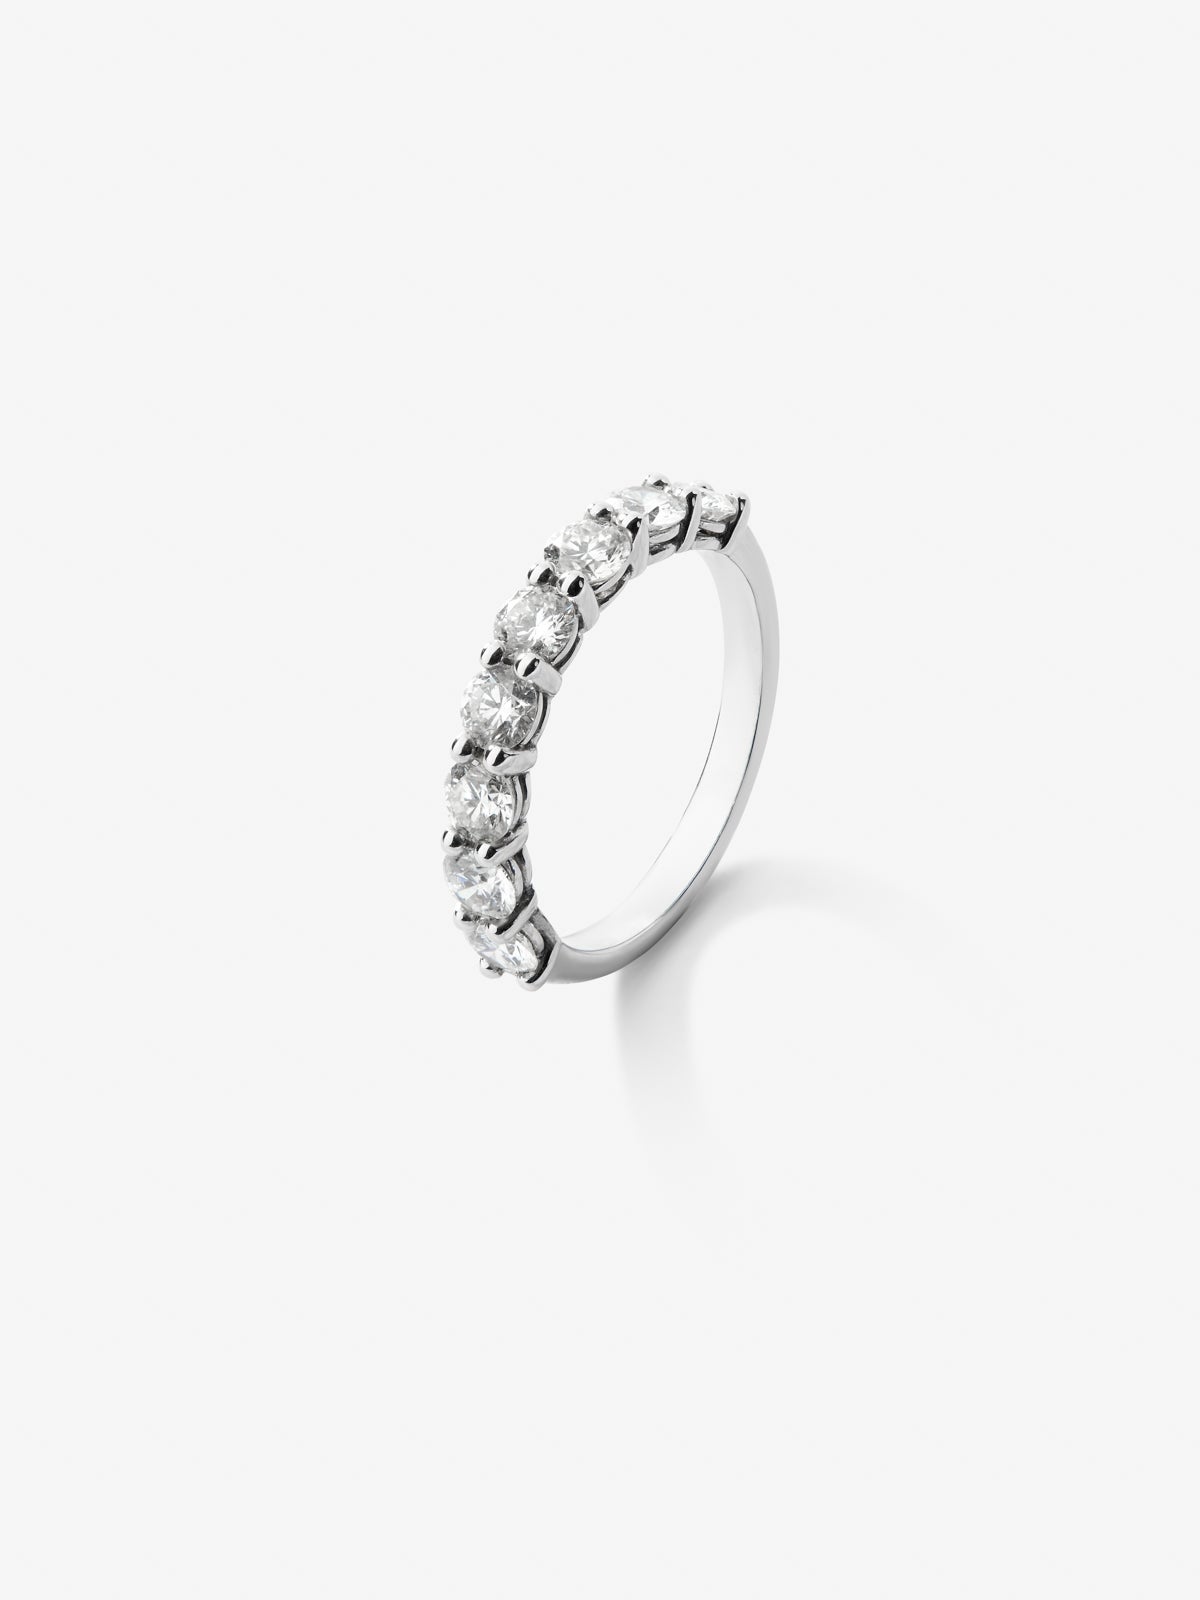 18K White Gold Commitment Alliance ring with diamonds